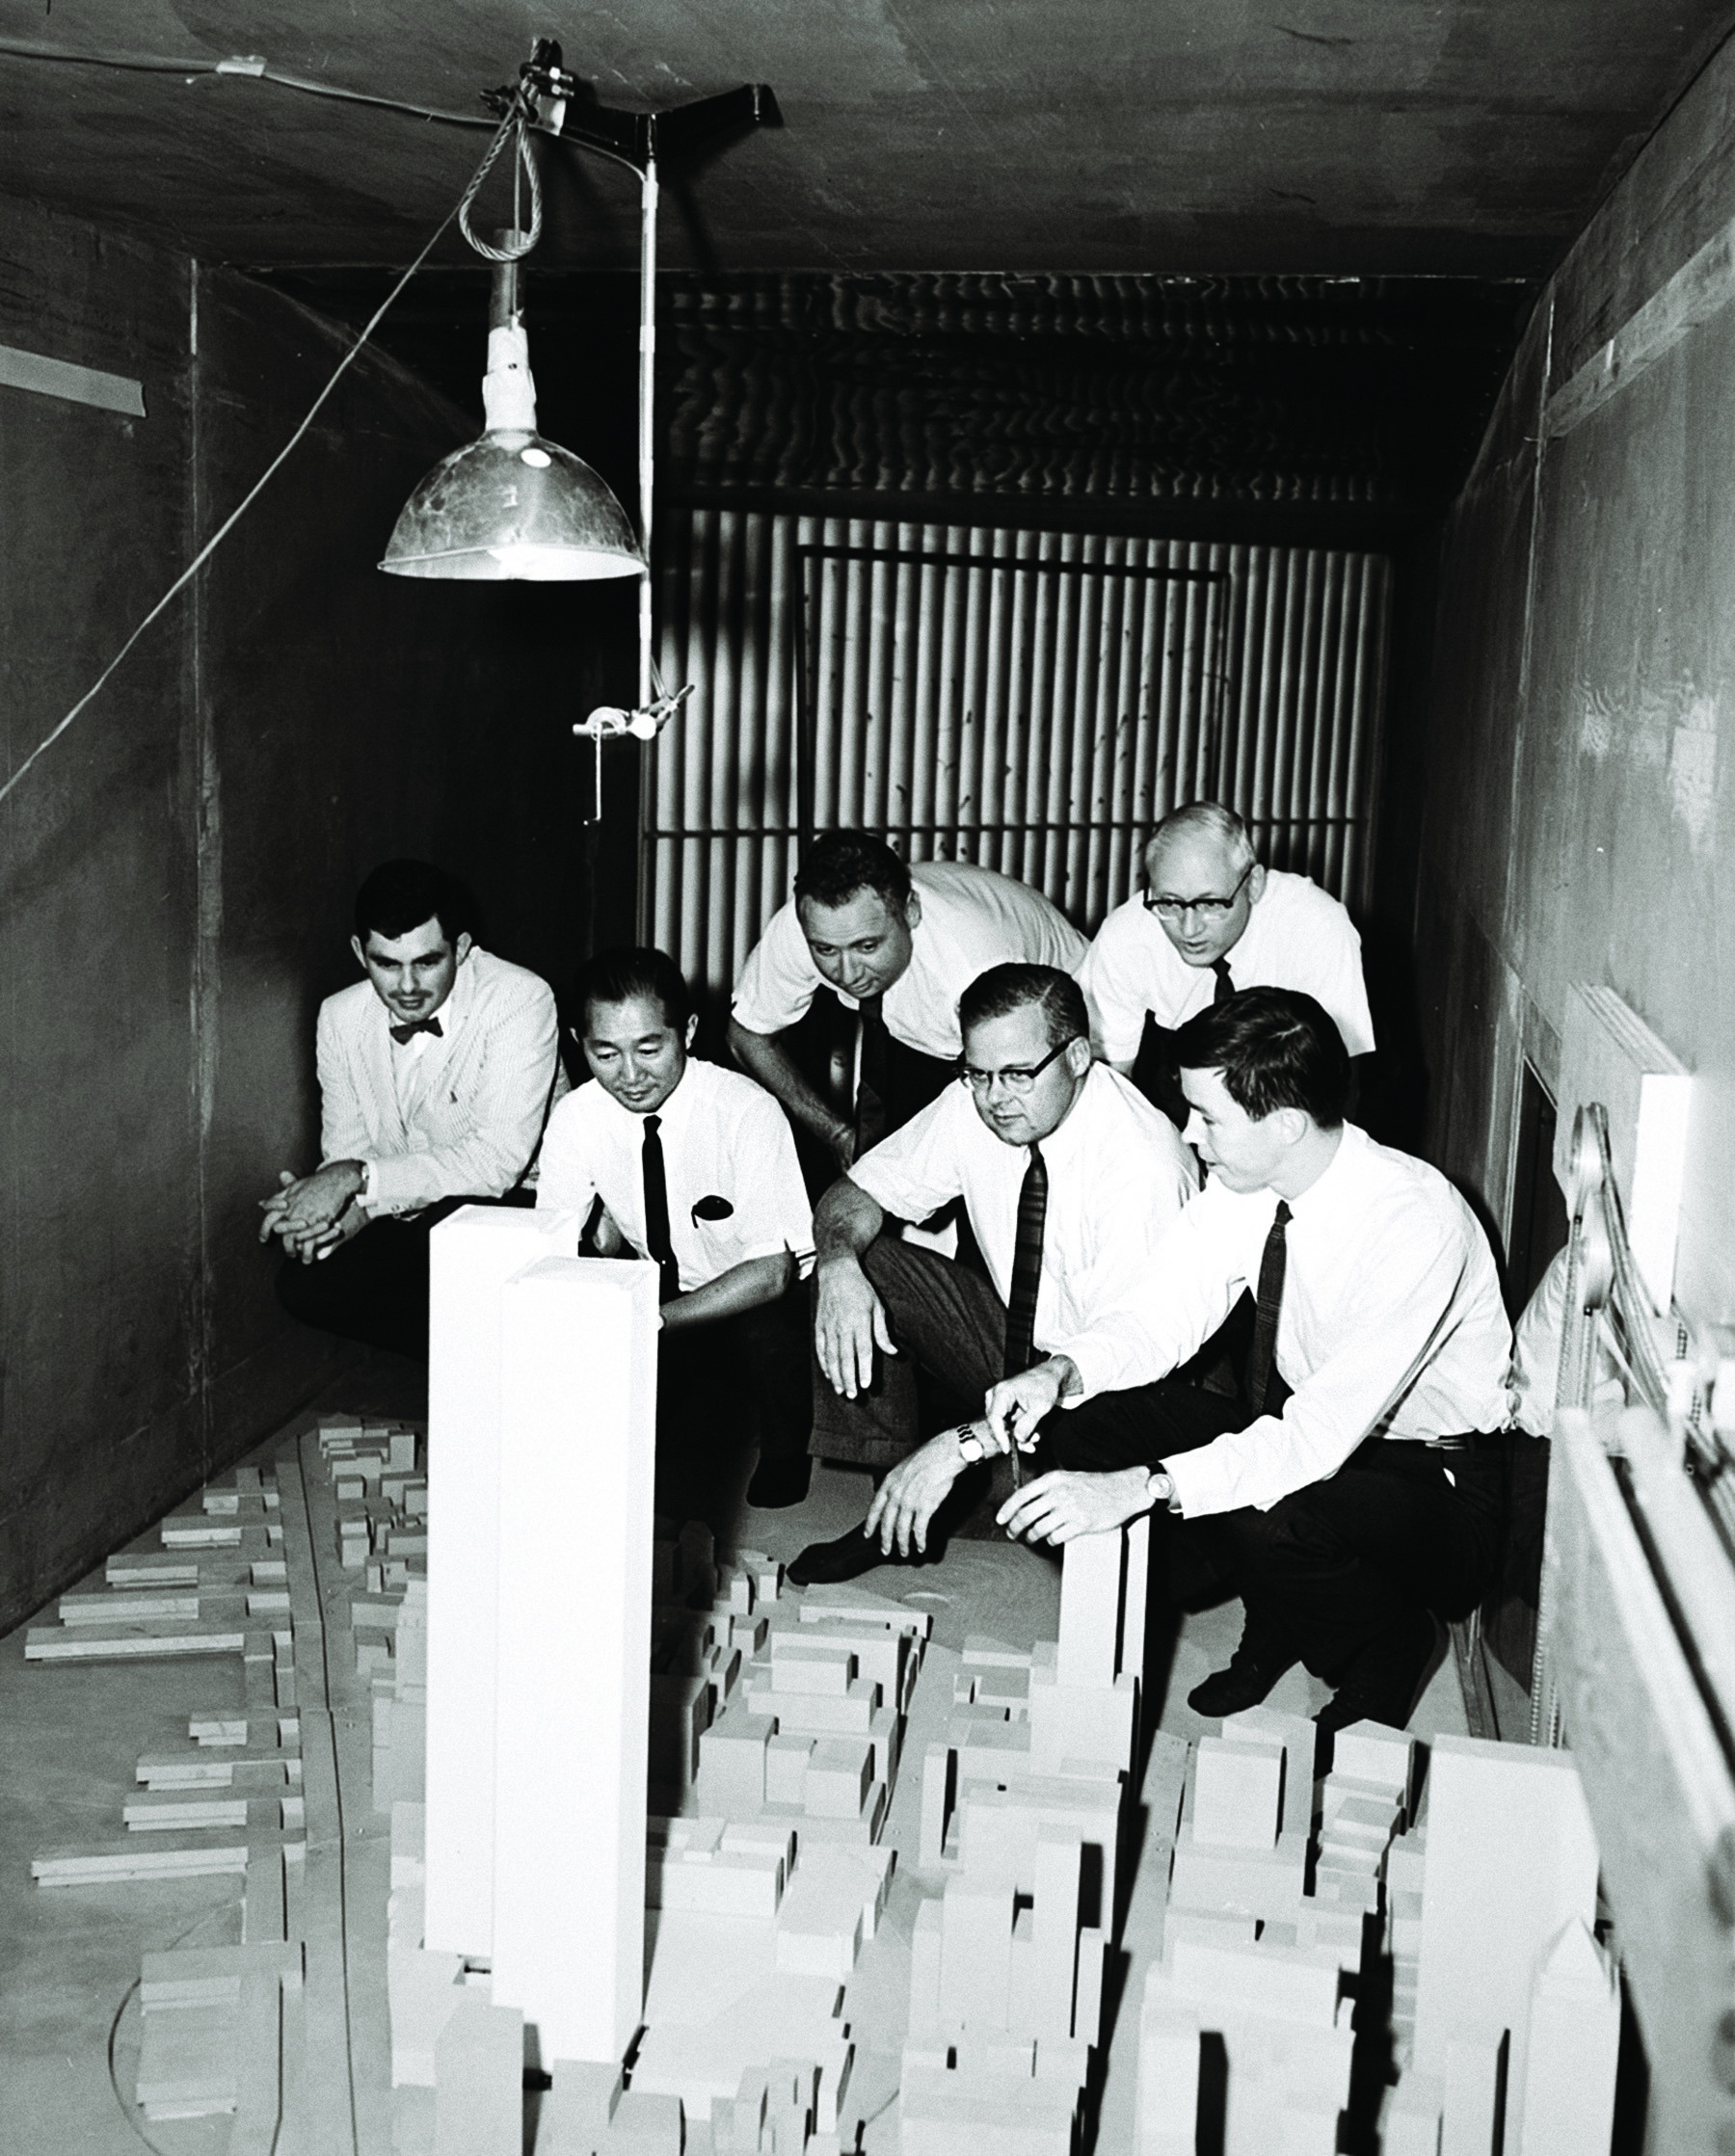 six men in white shirts and black ties hovering over a model of a large building complex